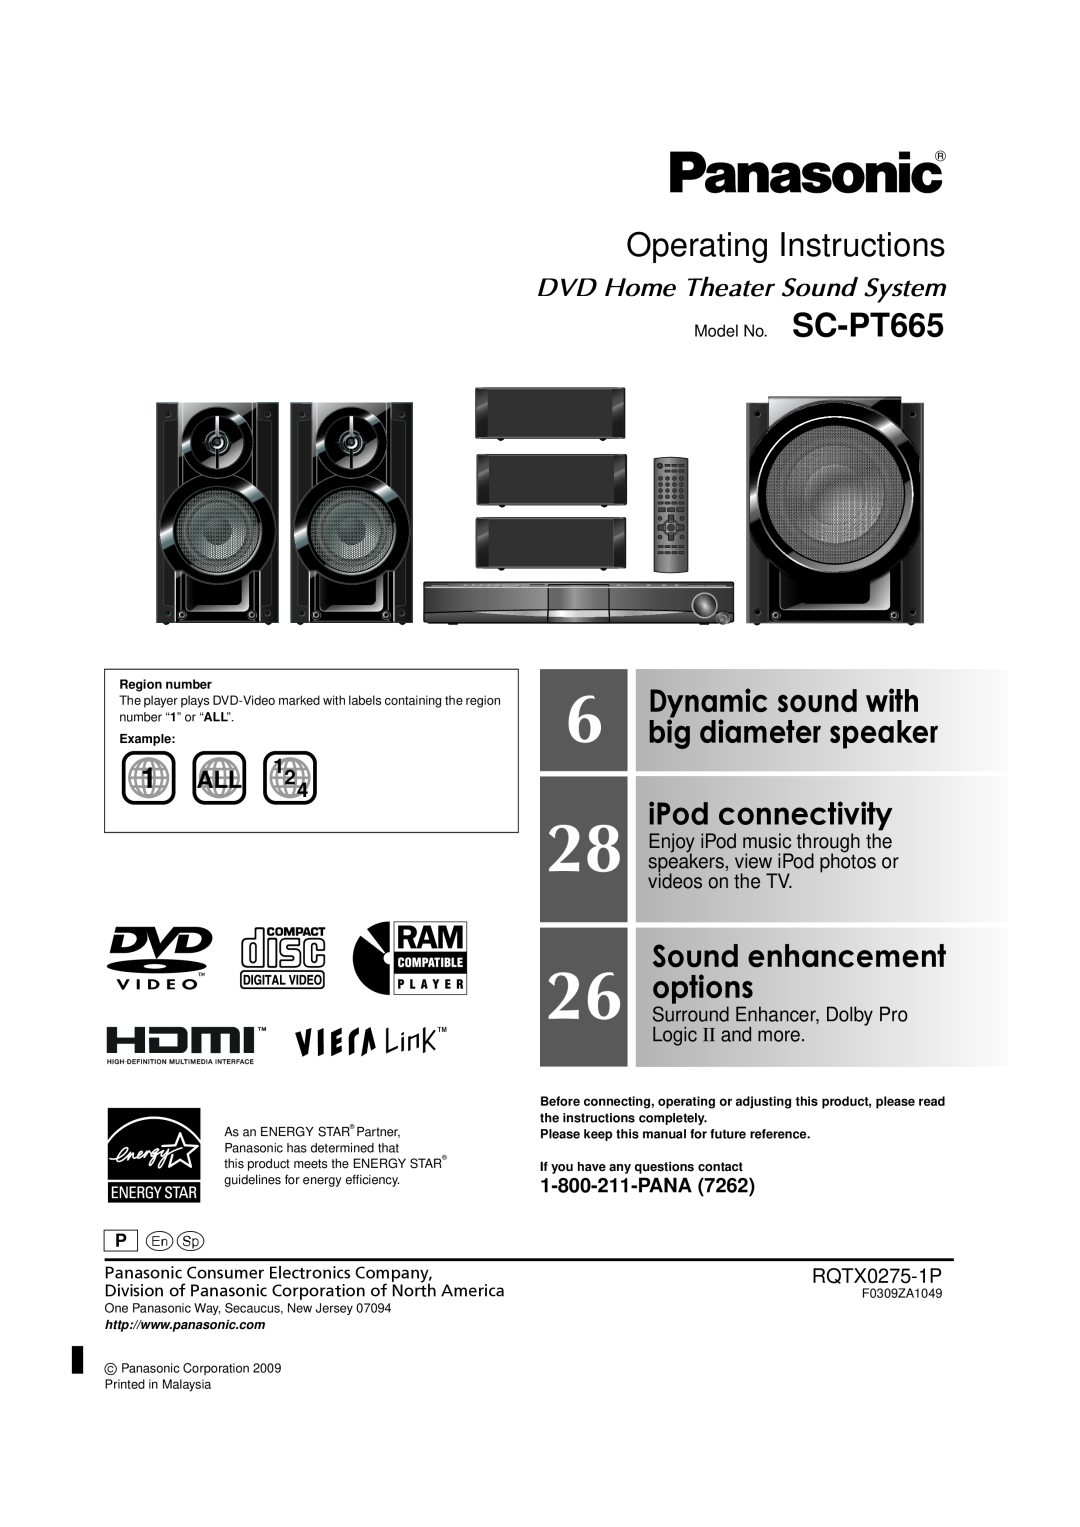 Panasonic SC-PT665 manual Operating Instructions, iPod connectivity, options, DVD Home Theater Sound System, 1 ALL, P pr 